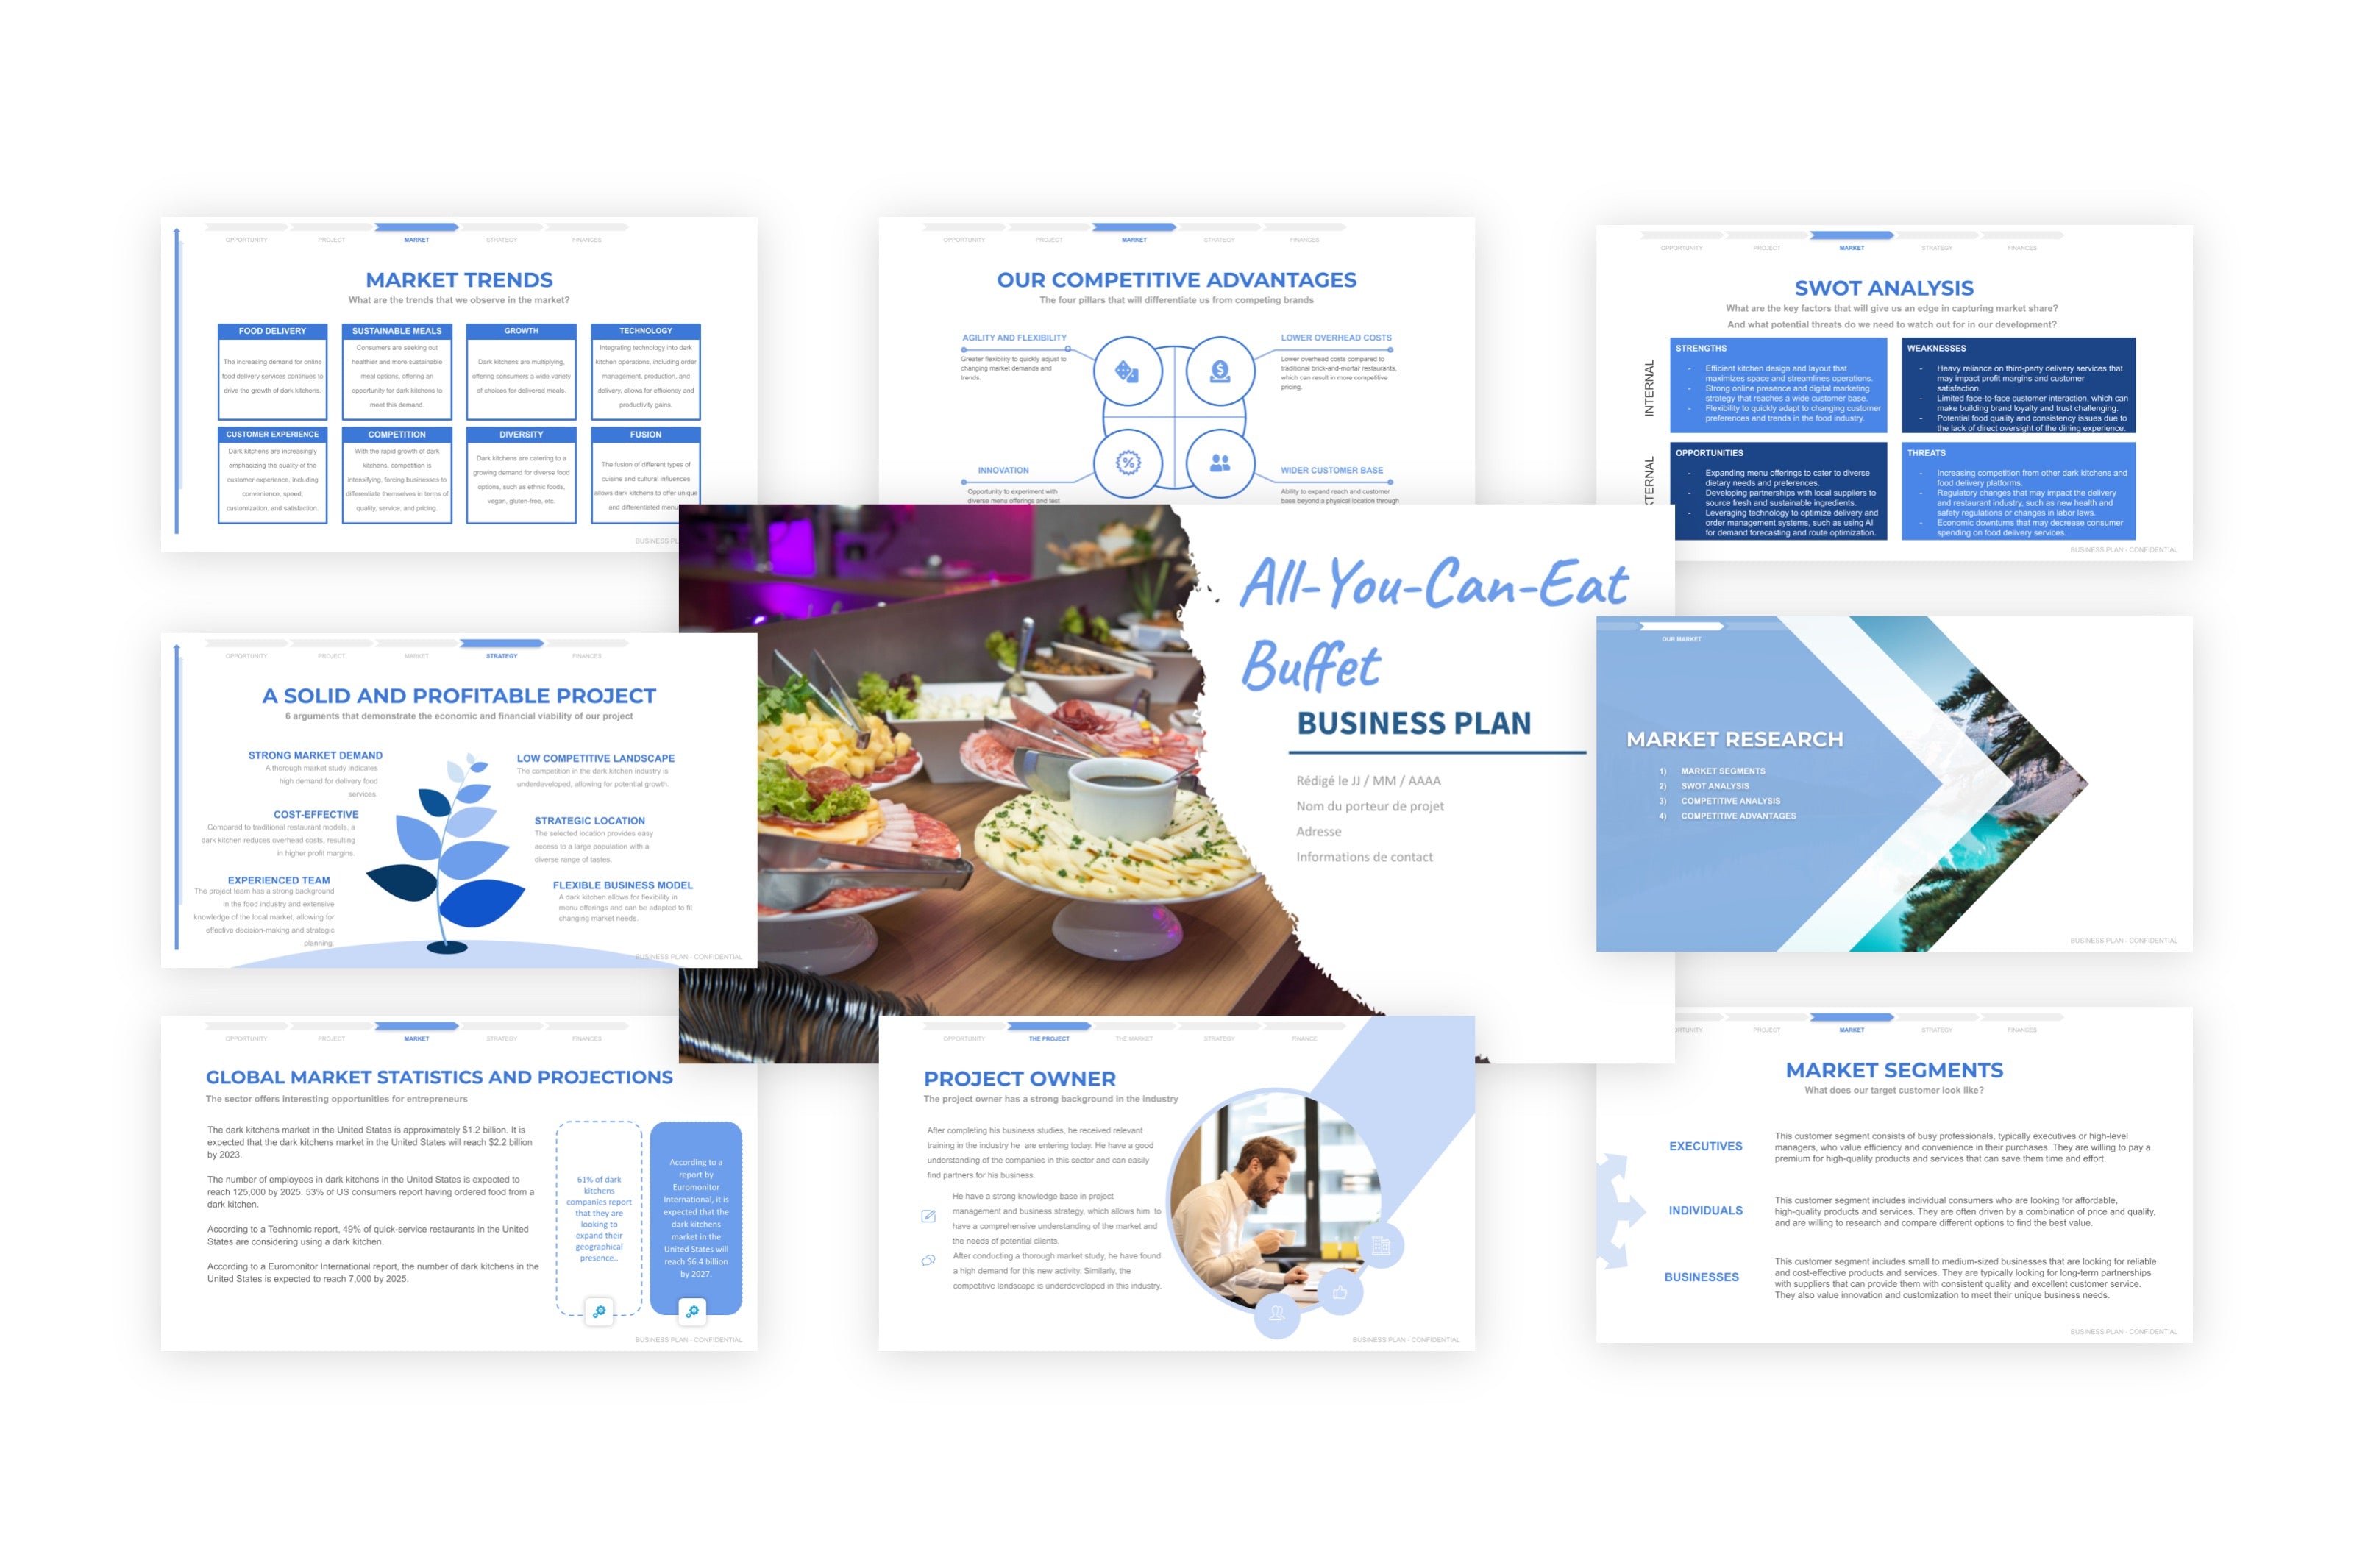 All-You-Can-Eat Restaurant Business Plan